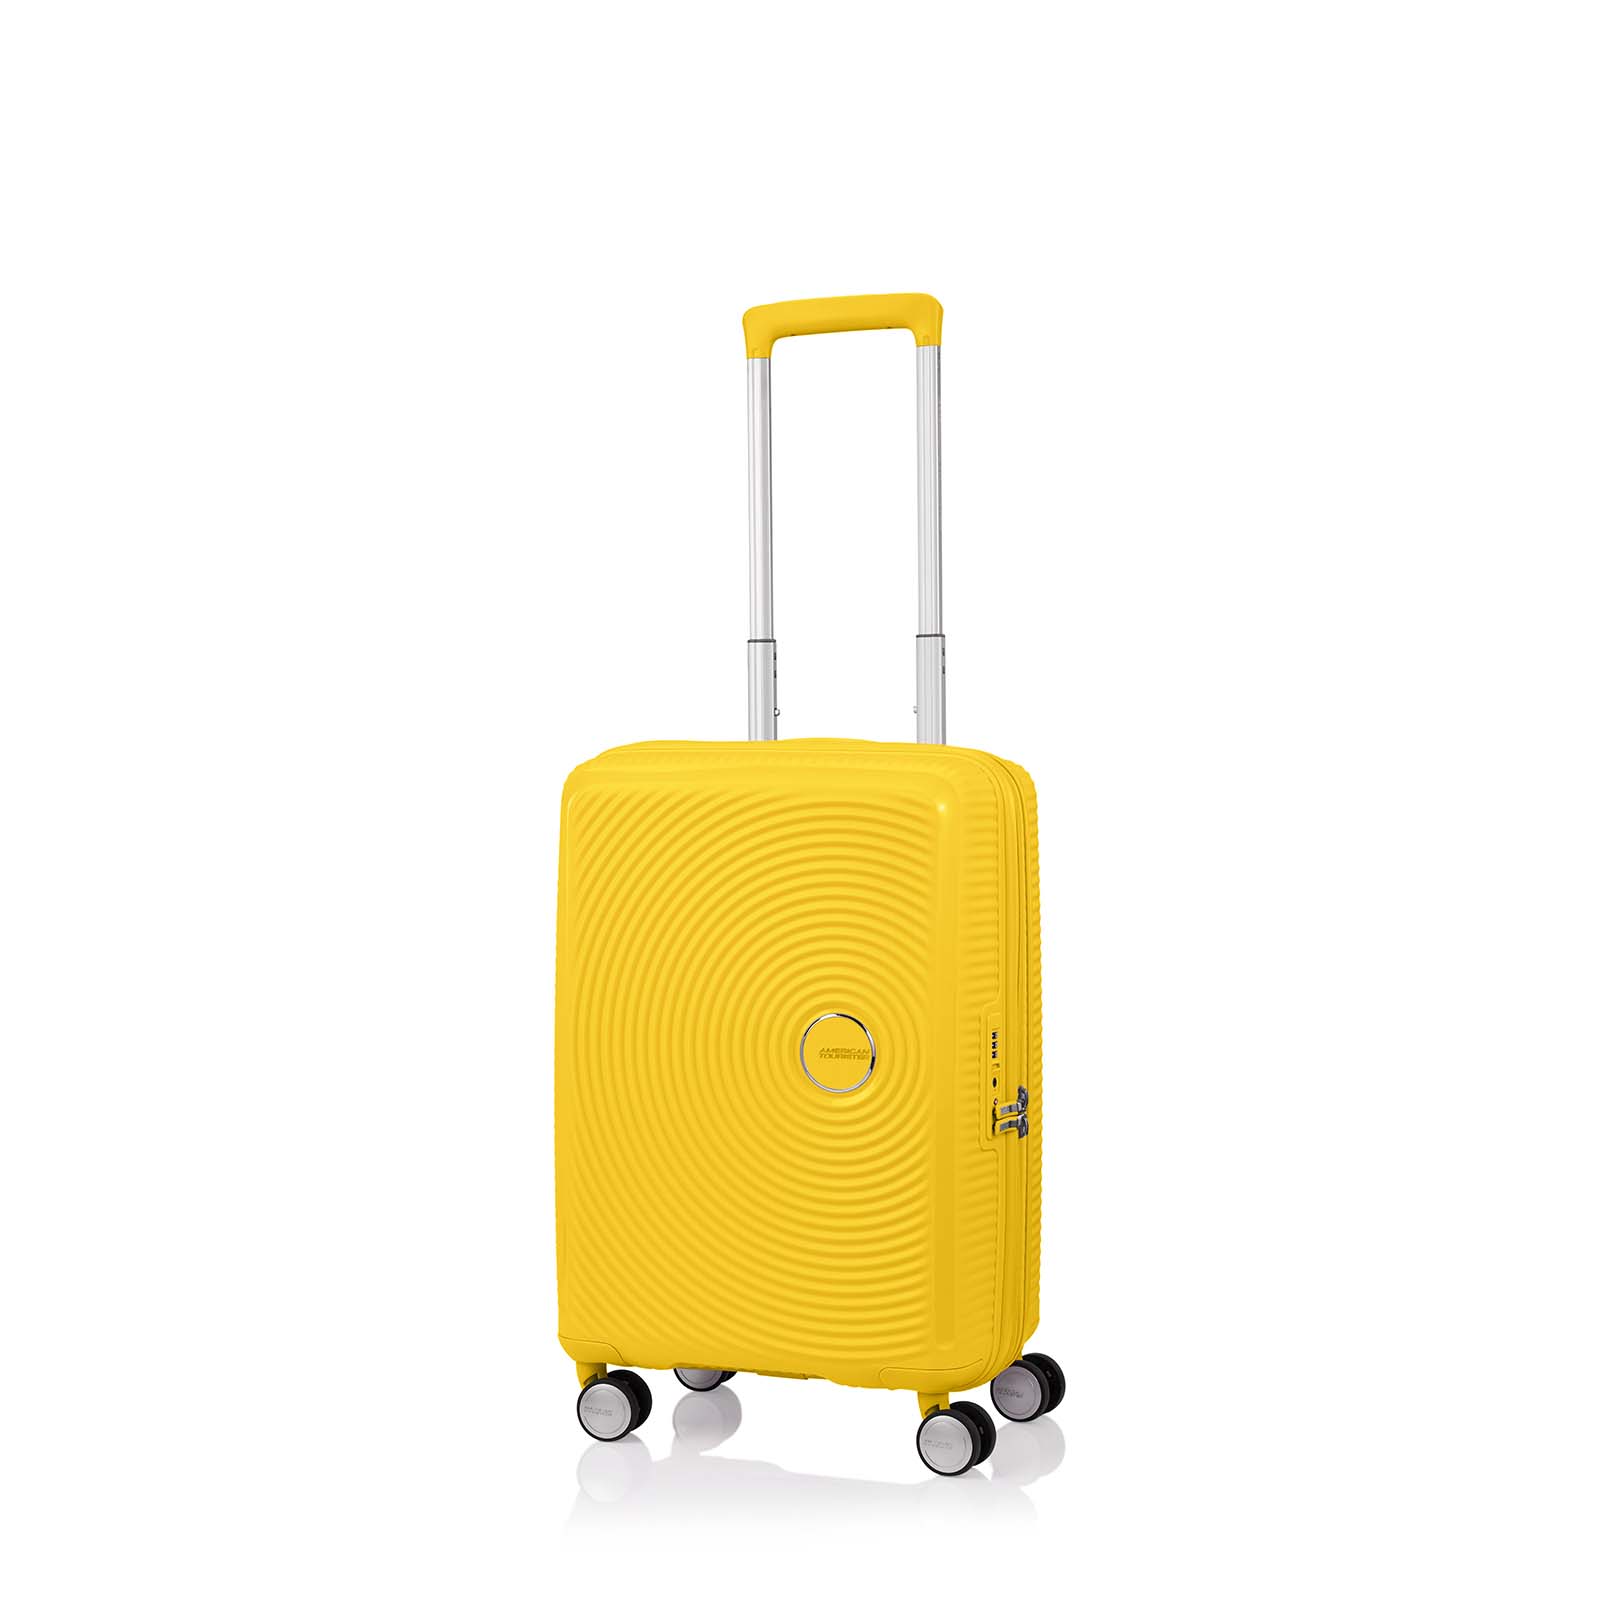 American-Tourister-Curio-2-55cm-Carry-On-Suitcase-Golden-Yellow-Angle